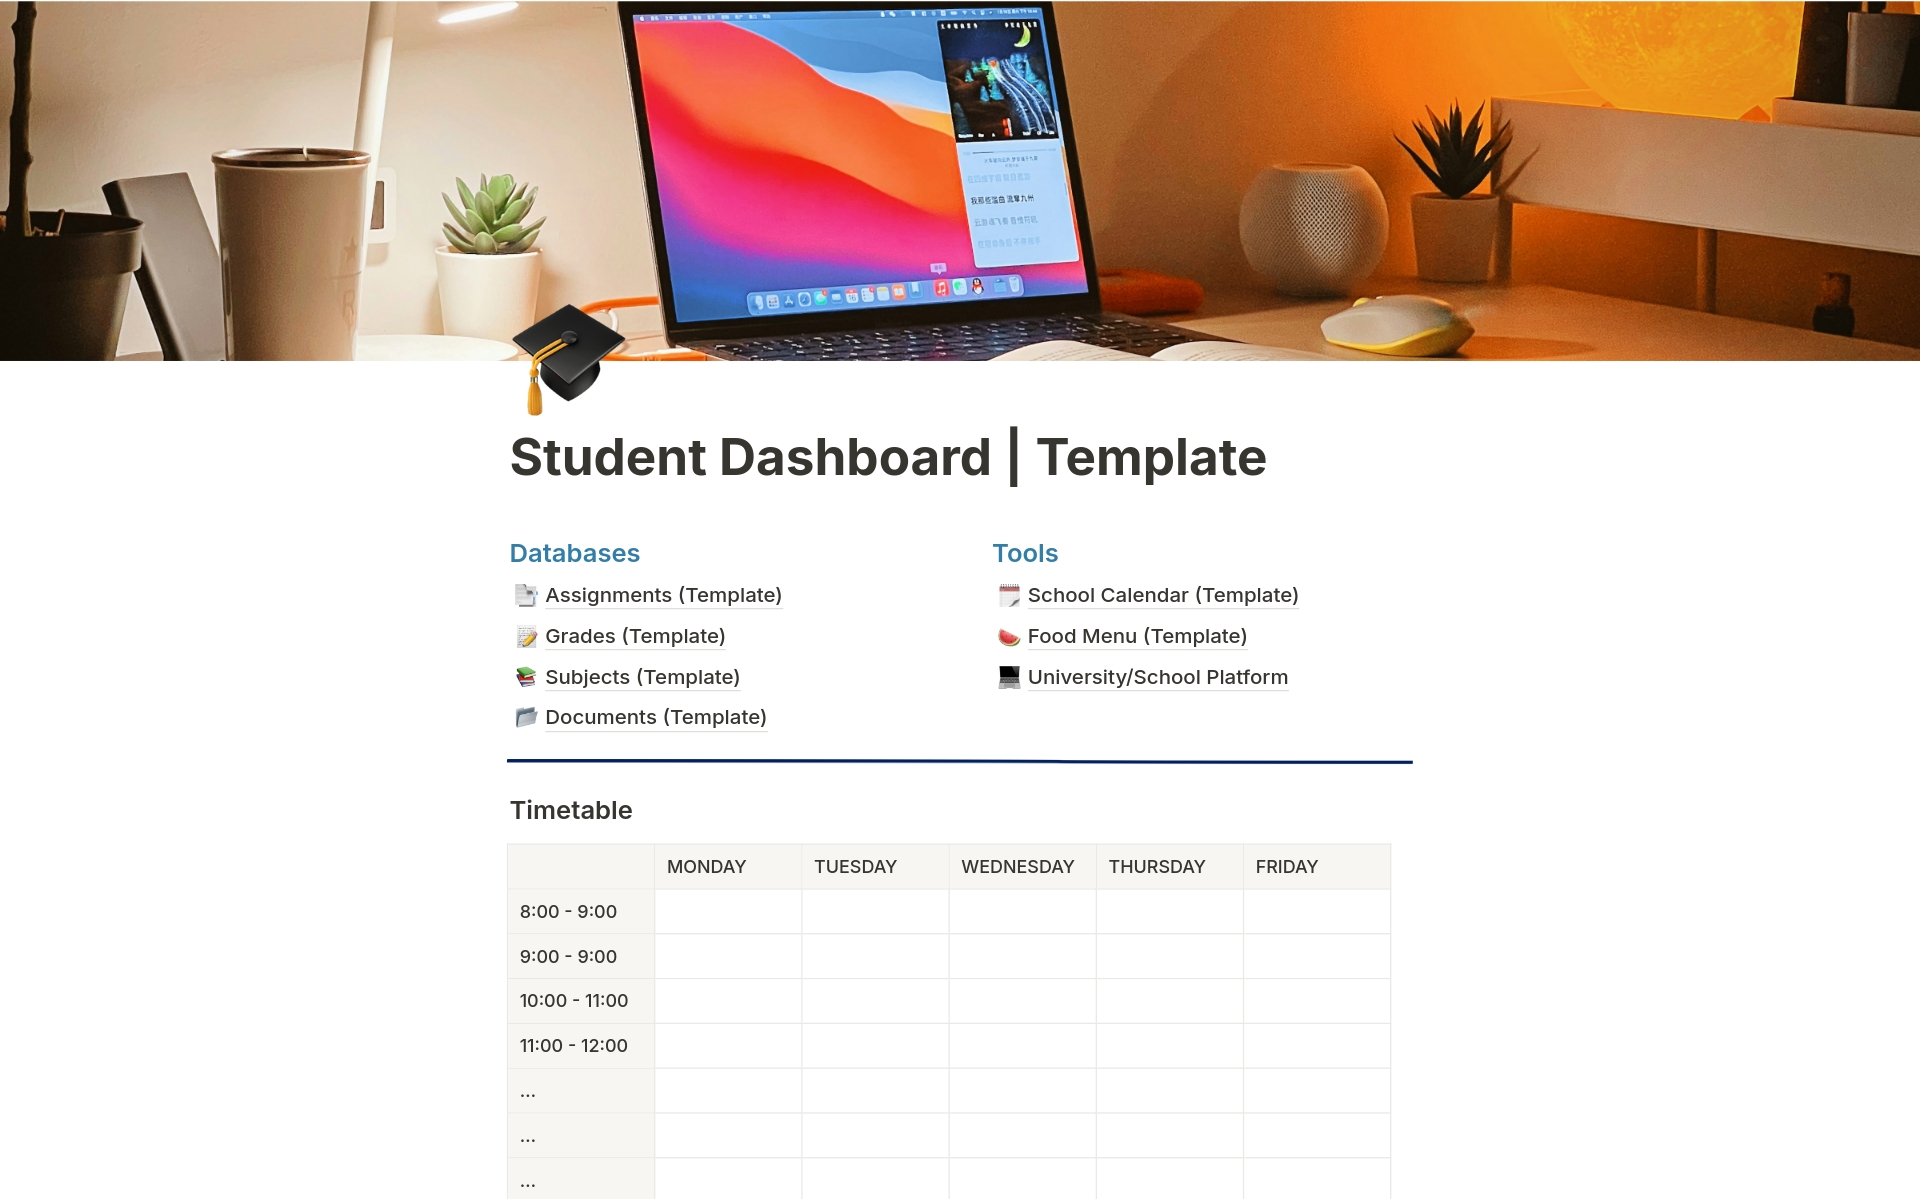 Stay organized with the Notion Student Template. Track subjects, grades, documents, and pending assignments. Keep everything in one place for efficient studying.